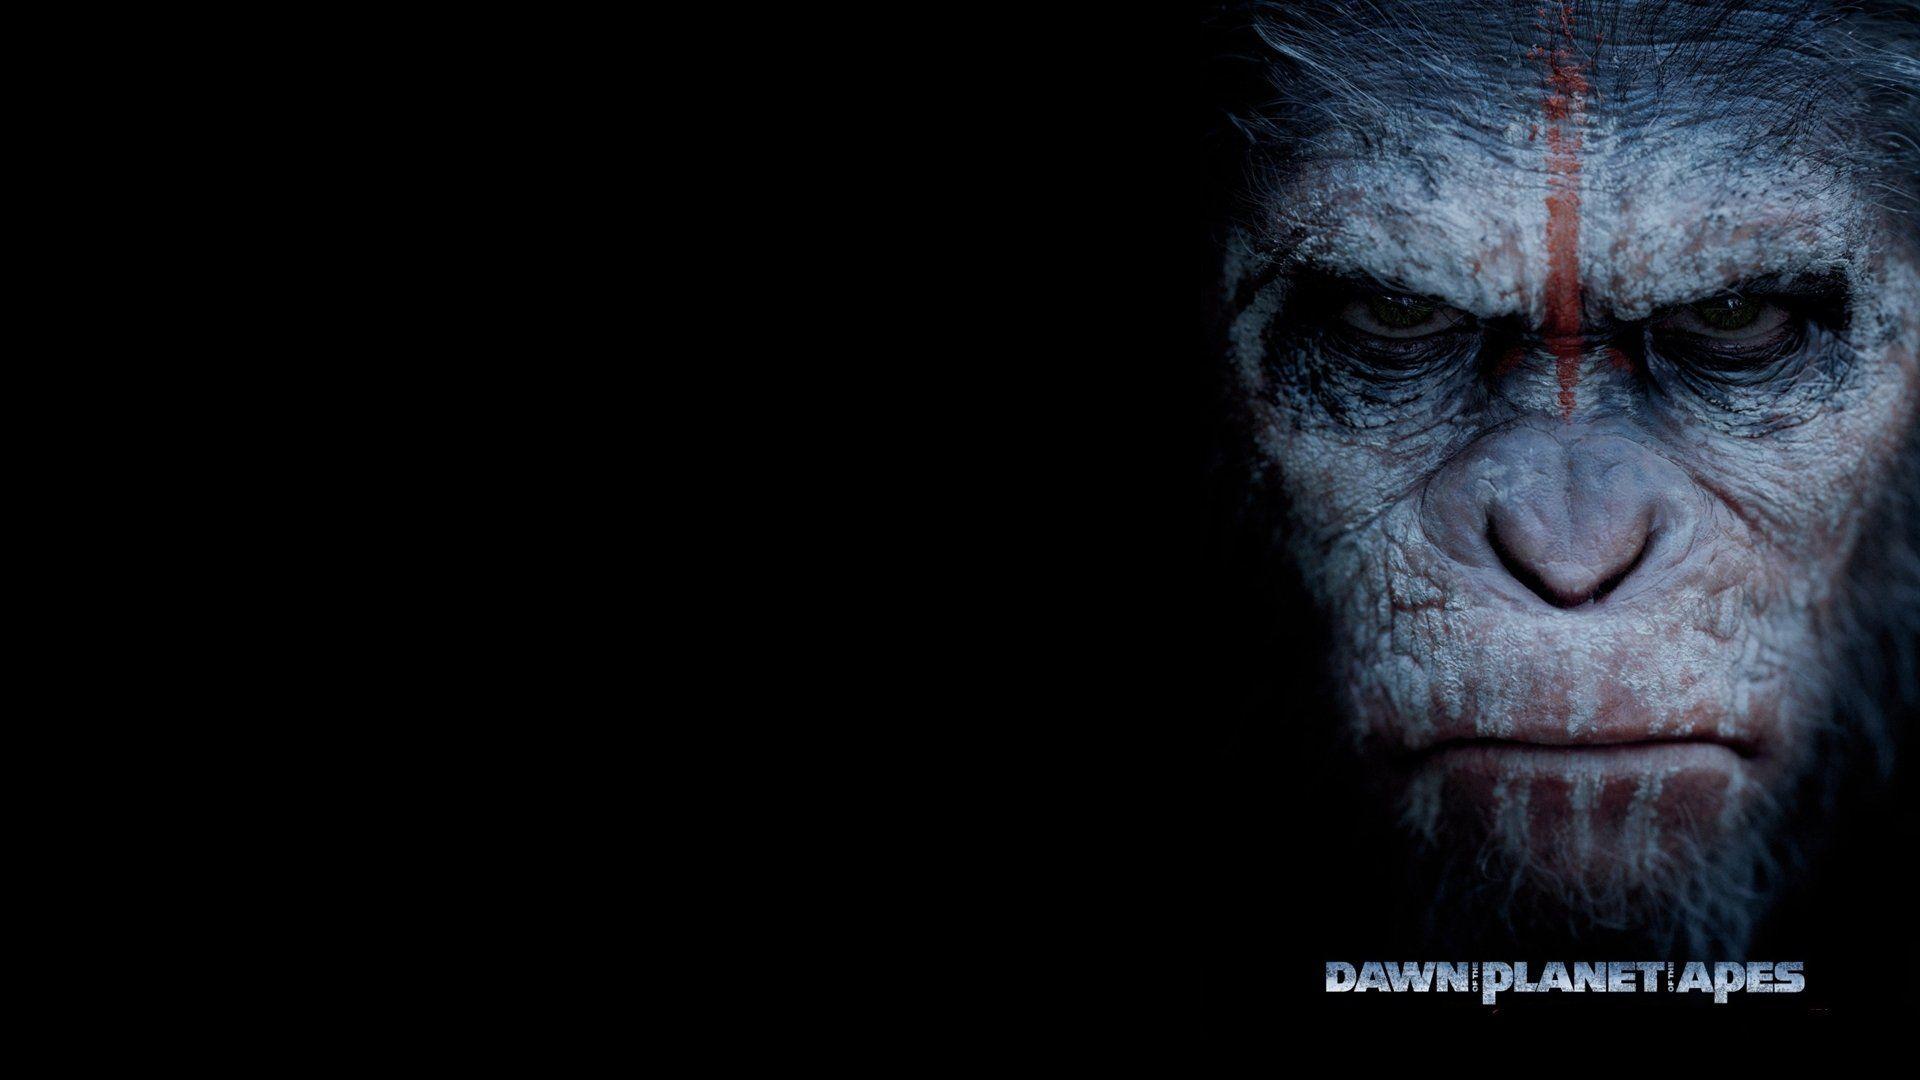 HD wallpaper Movie Dawn of the Planet of the Apes Andy Serkis Caesar  Planet of the Apes  Wallpaper Flare